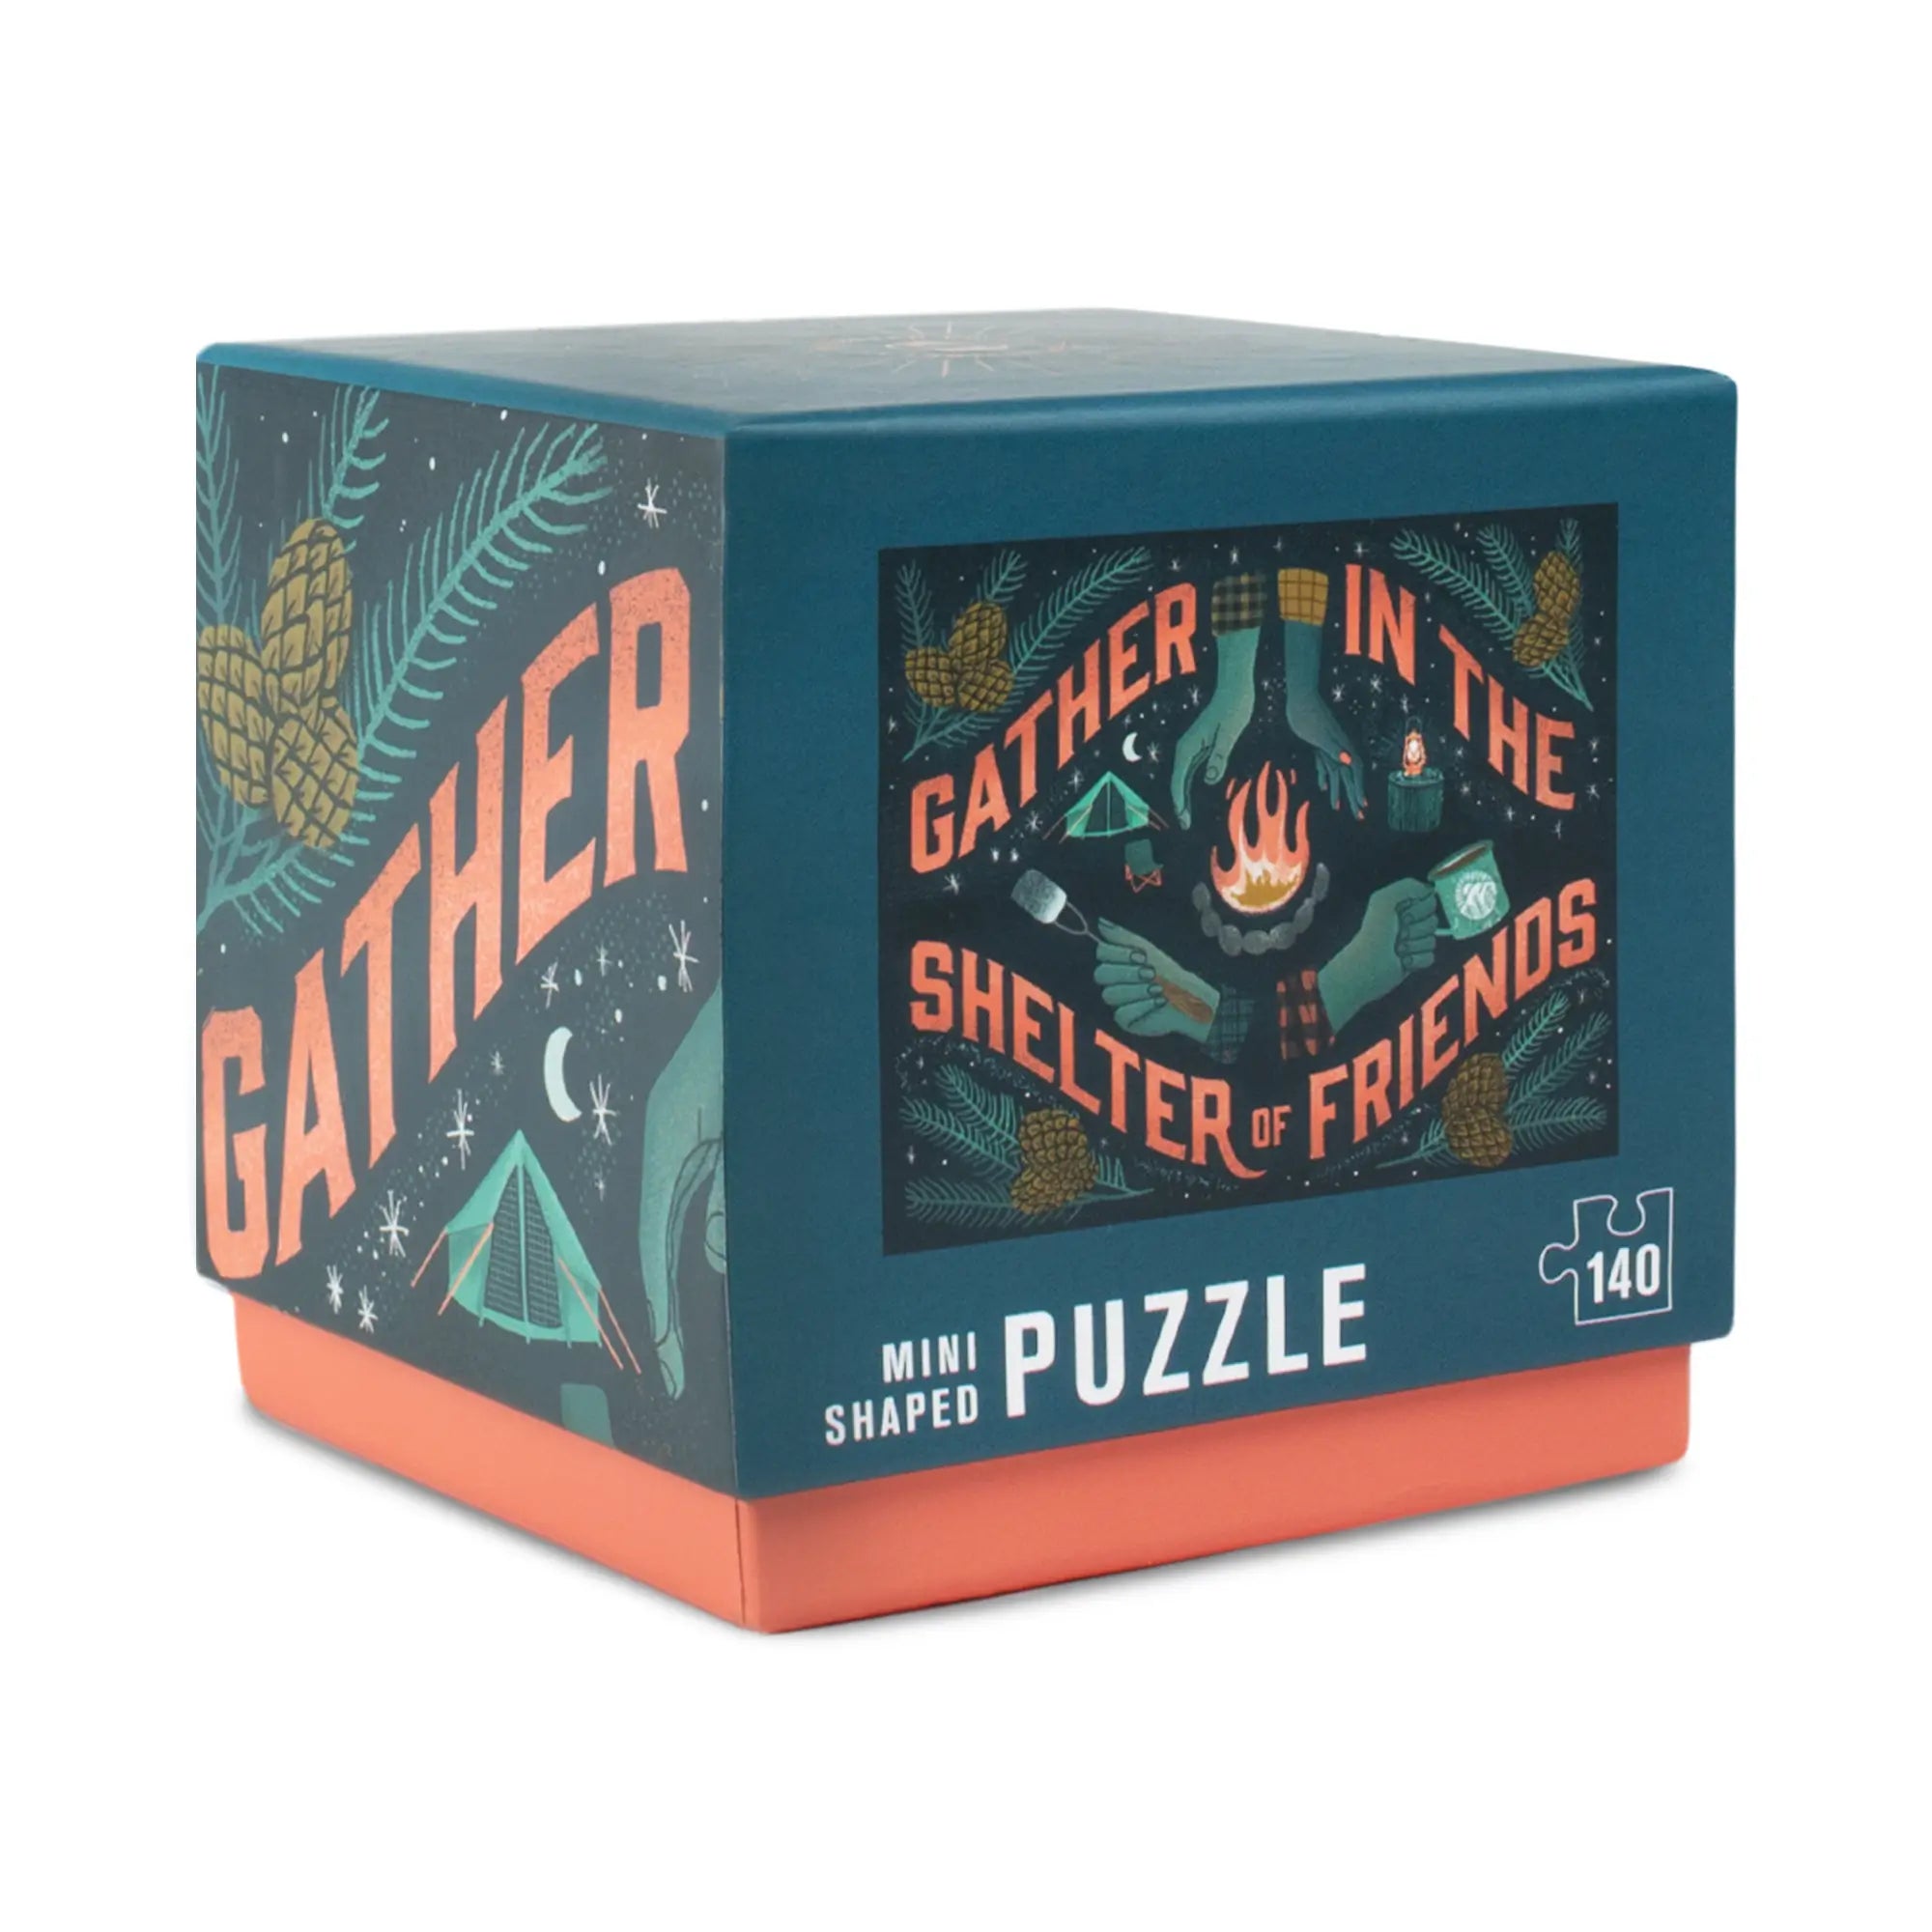 Mini Jigsaw Puzzle - Gather in the Shelter of Friends